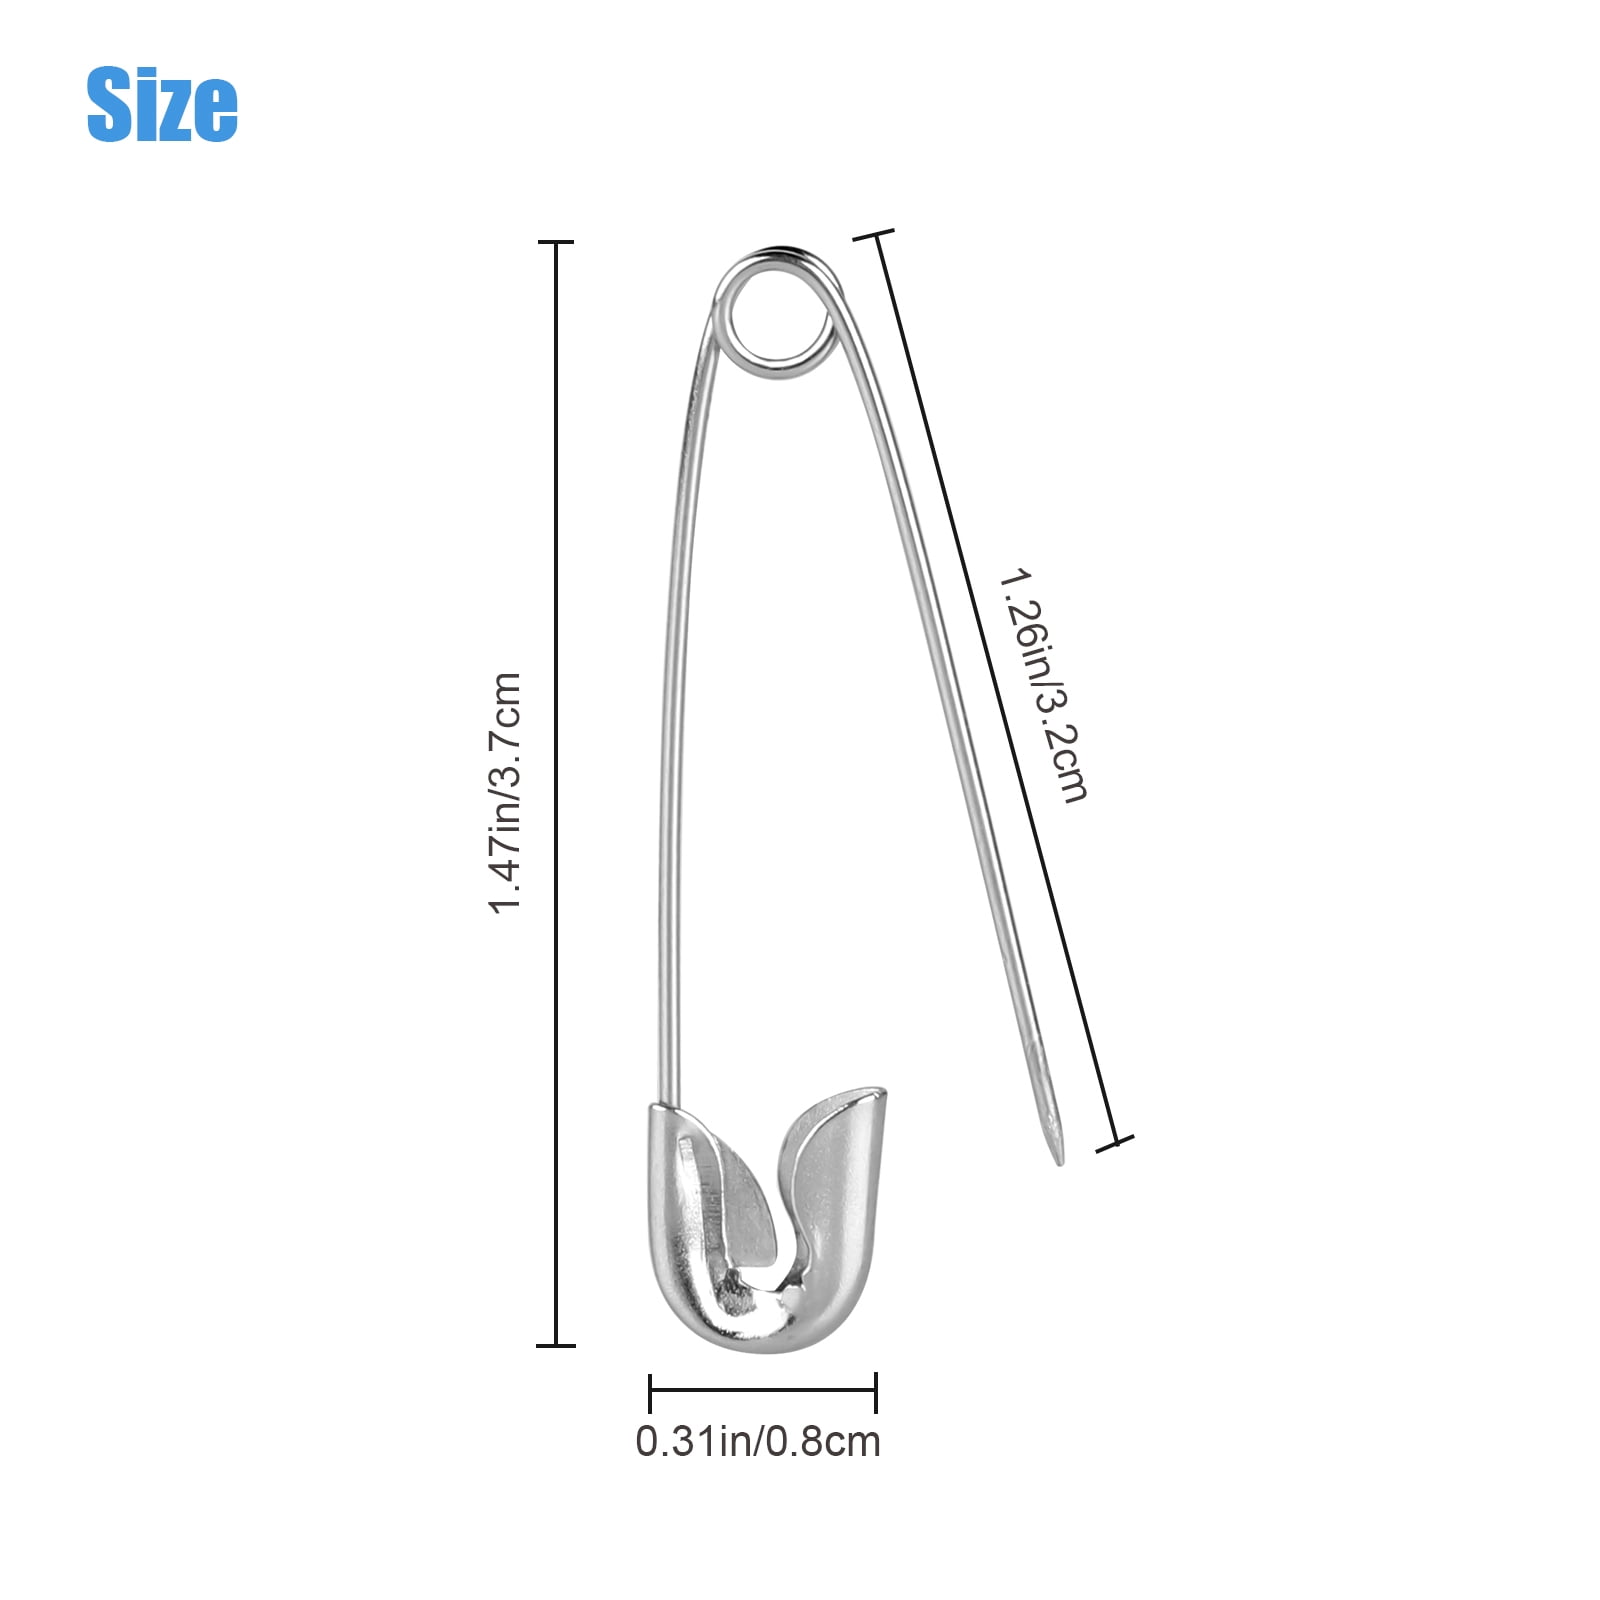  500Pcs Safety Pins Assorted, 1.5 Inch Rust-Resistant Steel Wire  Silver Sewing Safety Pins for Clothes, Large Safety Pins 1.5 Inch Bulk for  Clothes Crafts Use